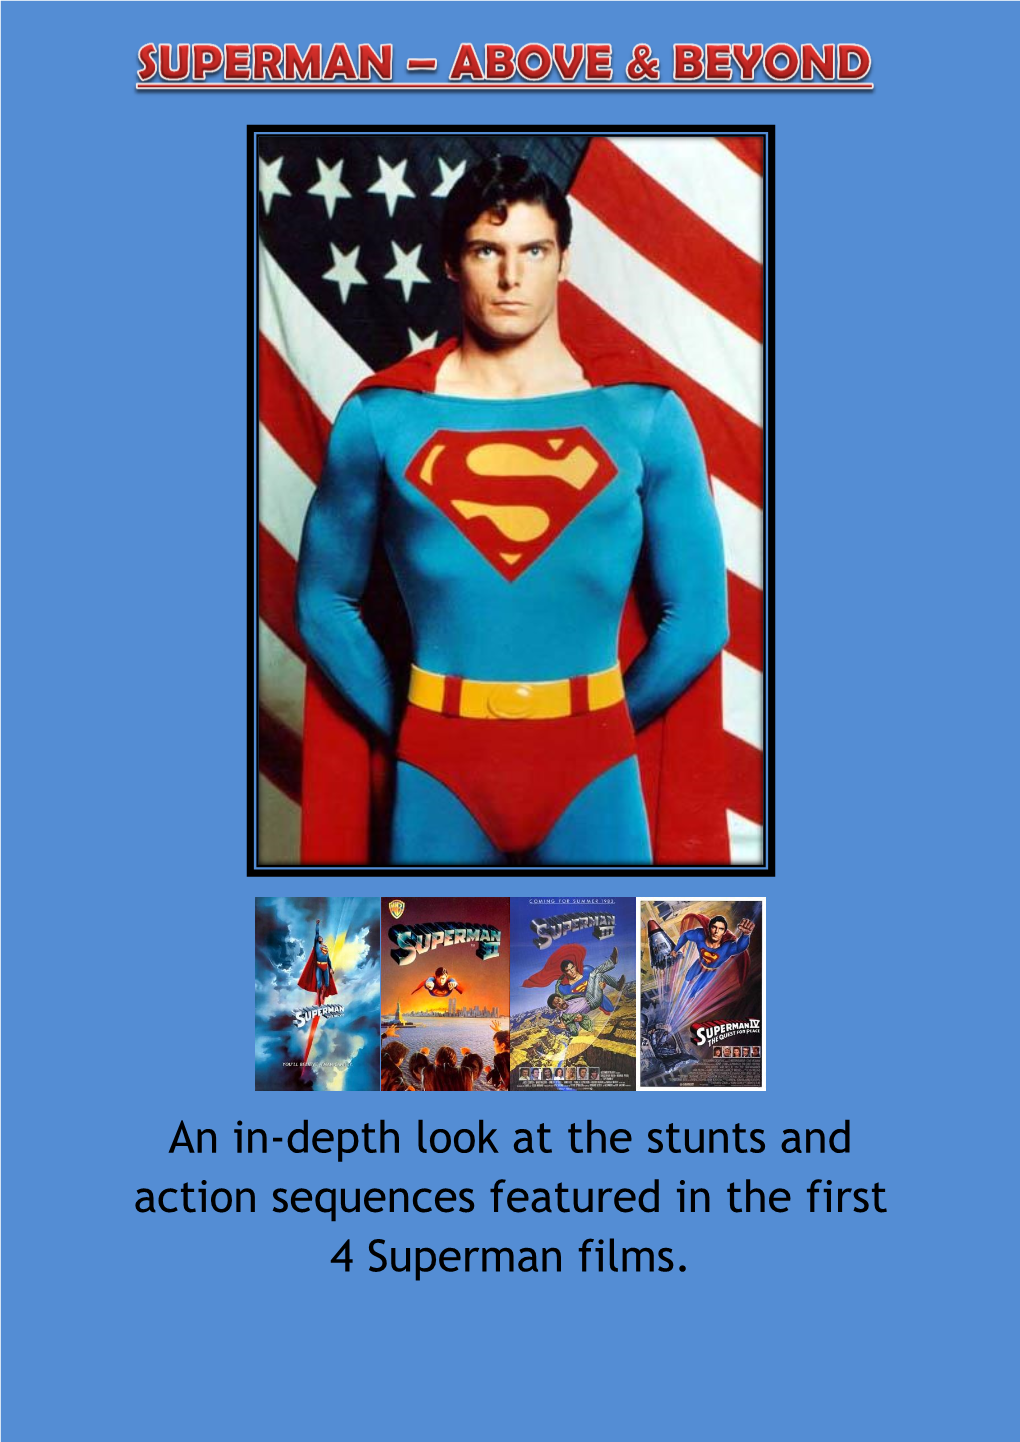 An In-Depth Look at the Stunts and Action Sequences Featured in the First 4 Superman Films